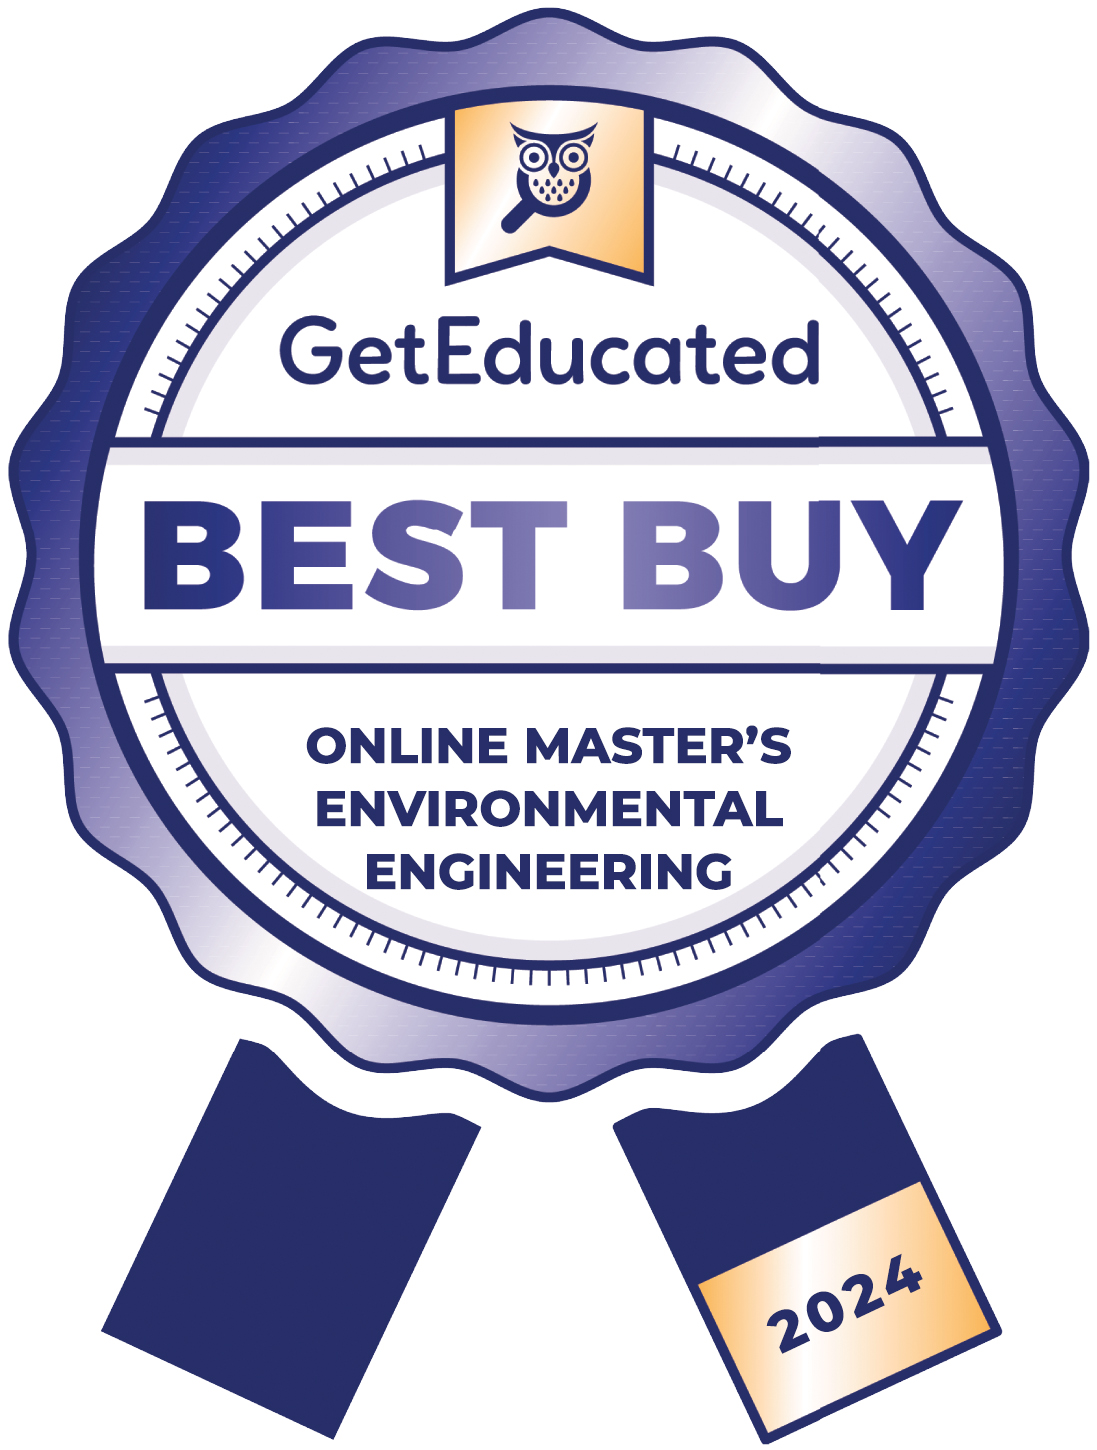 Rankings for the most affordable online master's environmental engineering degrees